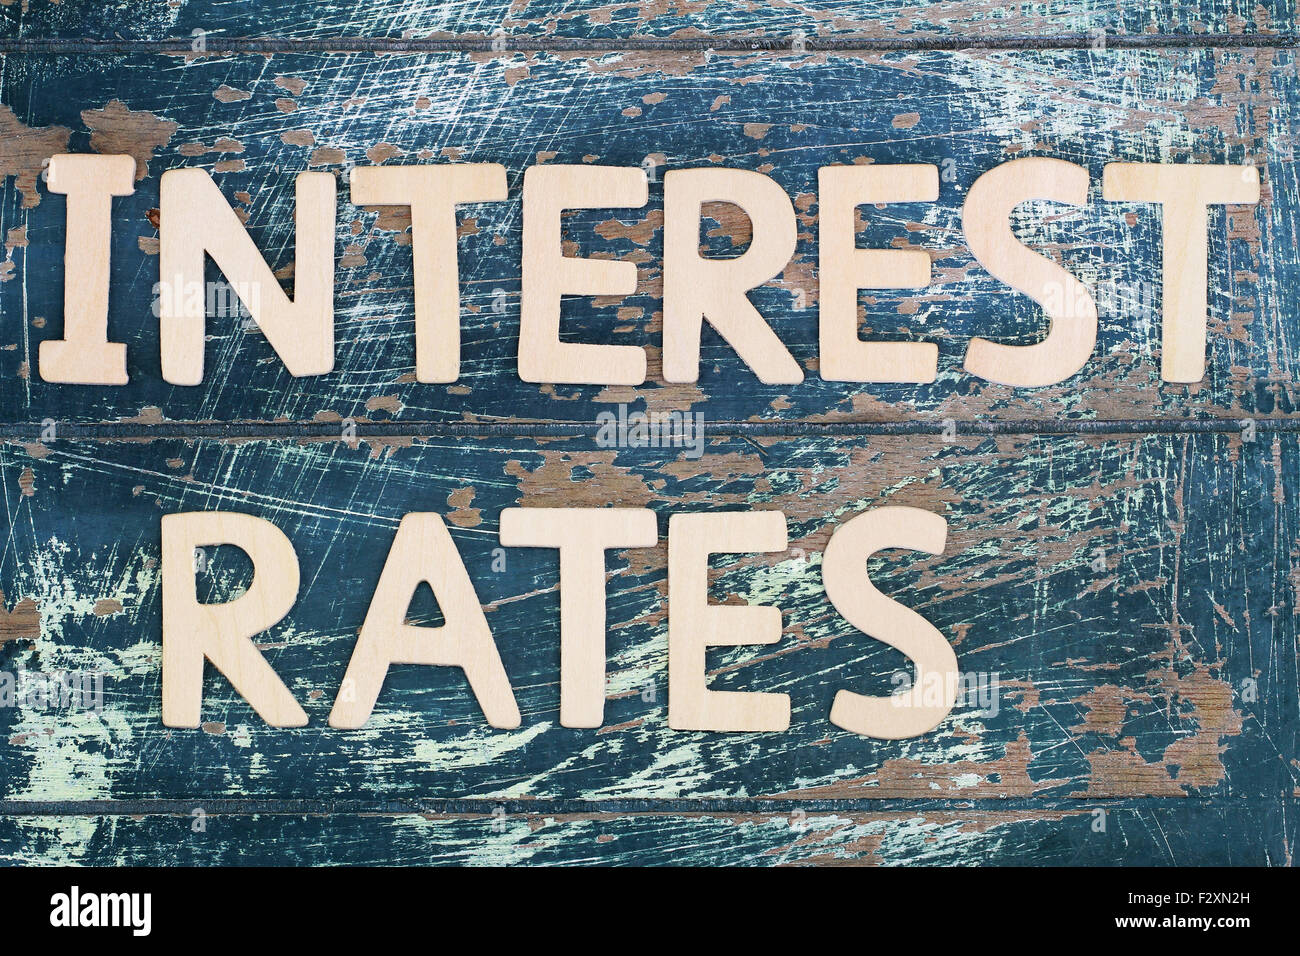 Interest rates written with wooden letters on rustic wooden surface Stock Photo